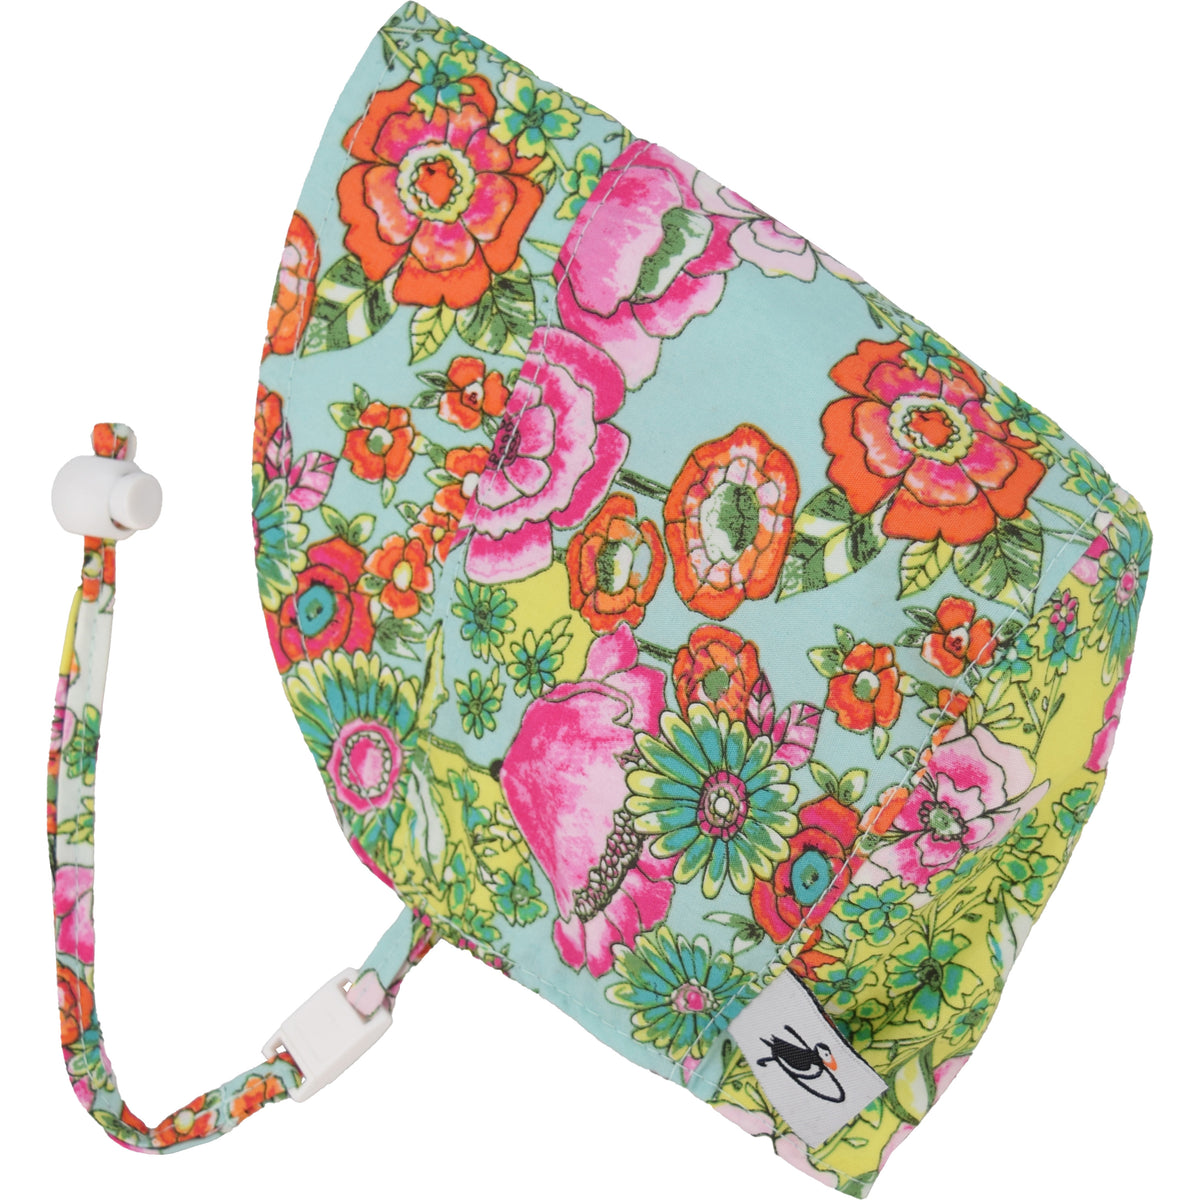 Infant and Toddler Sun Protection  Summer Bonnets with UPF50 Sun Protection. A chin tie with toggle and break away clip keep bonnet safely on head. Made in Canada by Puffin Gear -Cutting Garden Vivid Floral Print